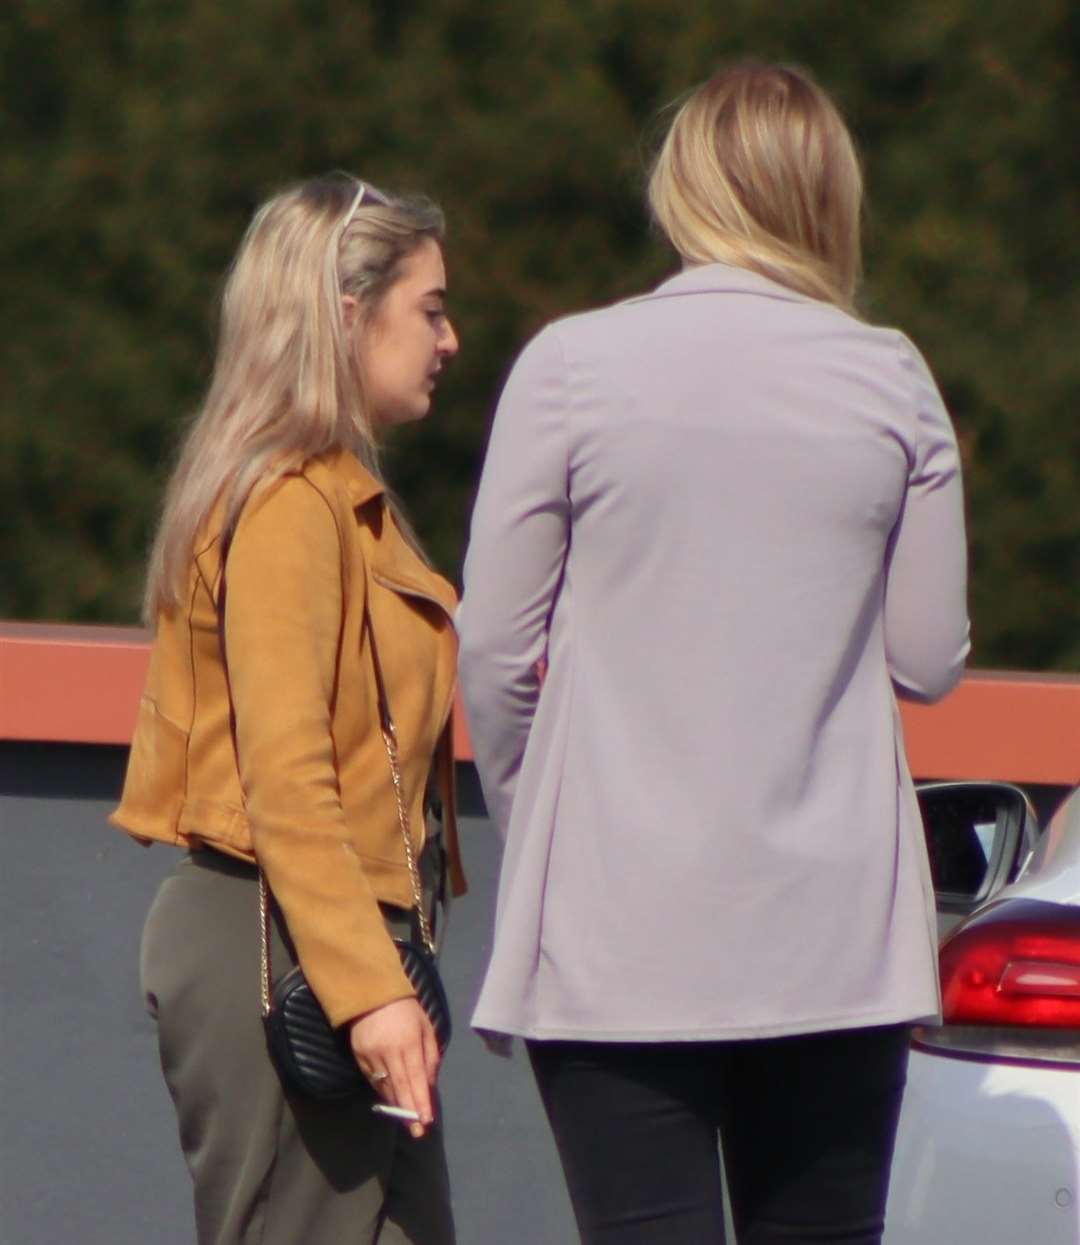 Abigail Wise, left, and Michaela Ridden, both from Sittingbourne, pleaded not guilty to assaulting Jazmin Apps in The Forum shopping centre car park